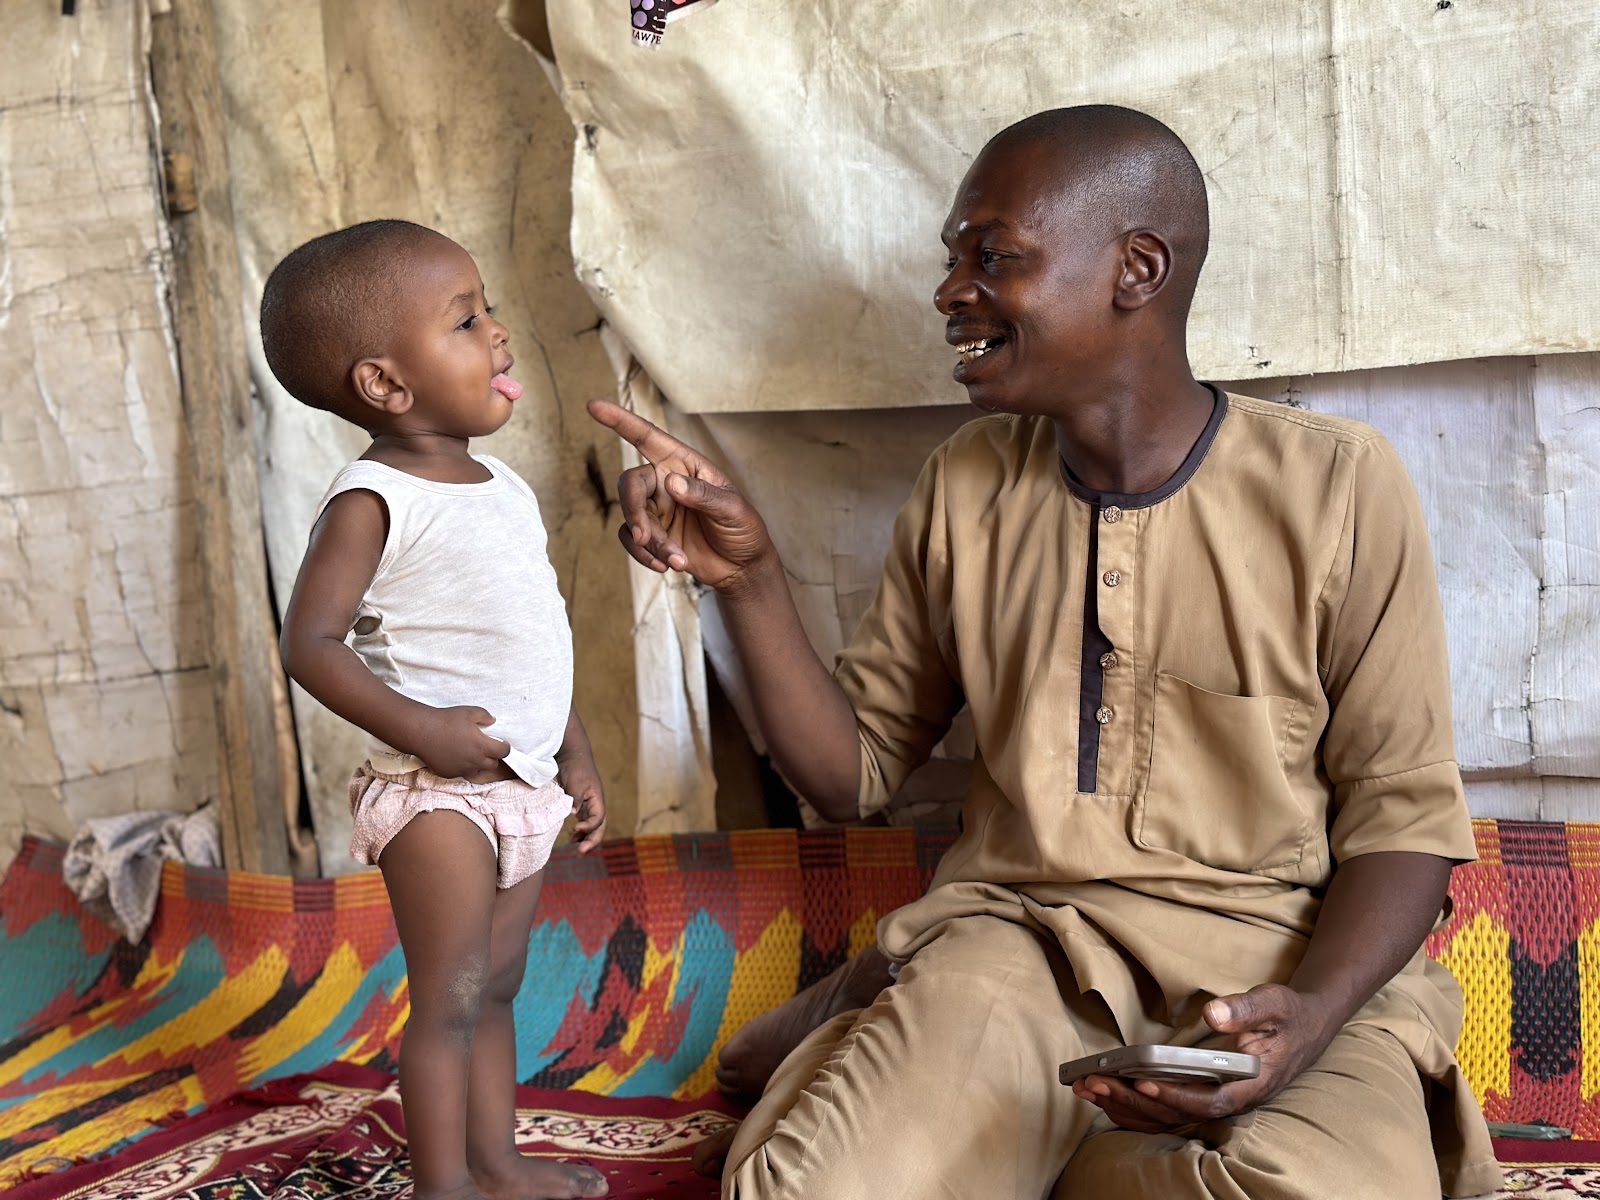 A joyful toddler sticking tongue out at a smiling man who is pointing at the child, sitting in a traditional dwelling.